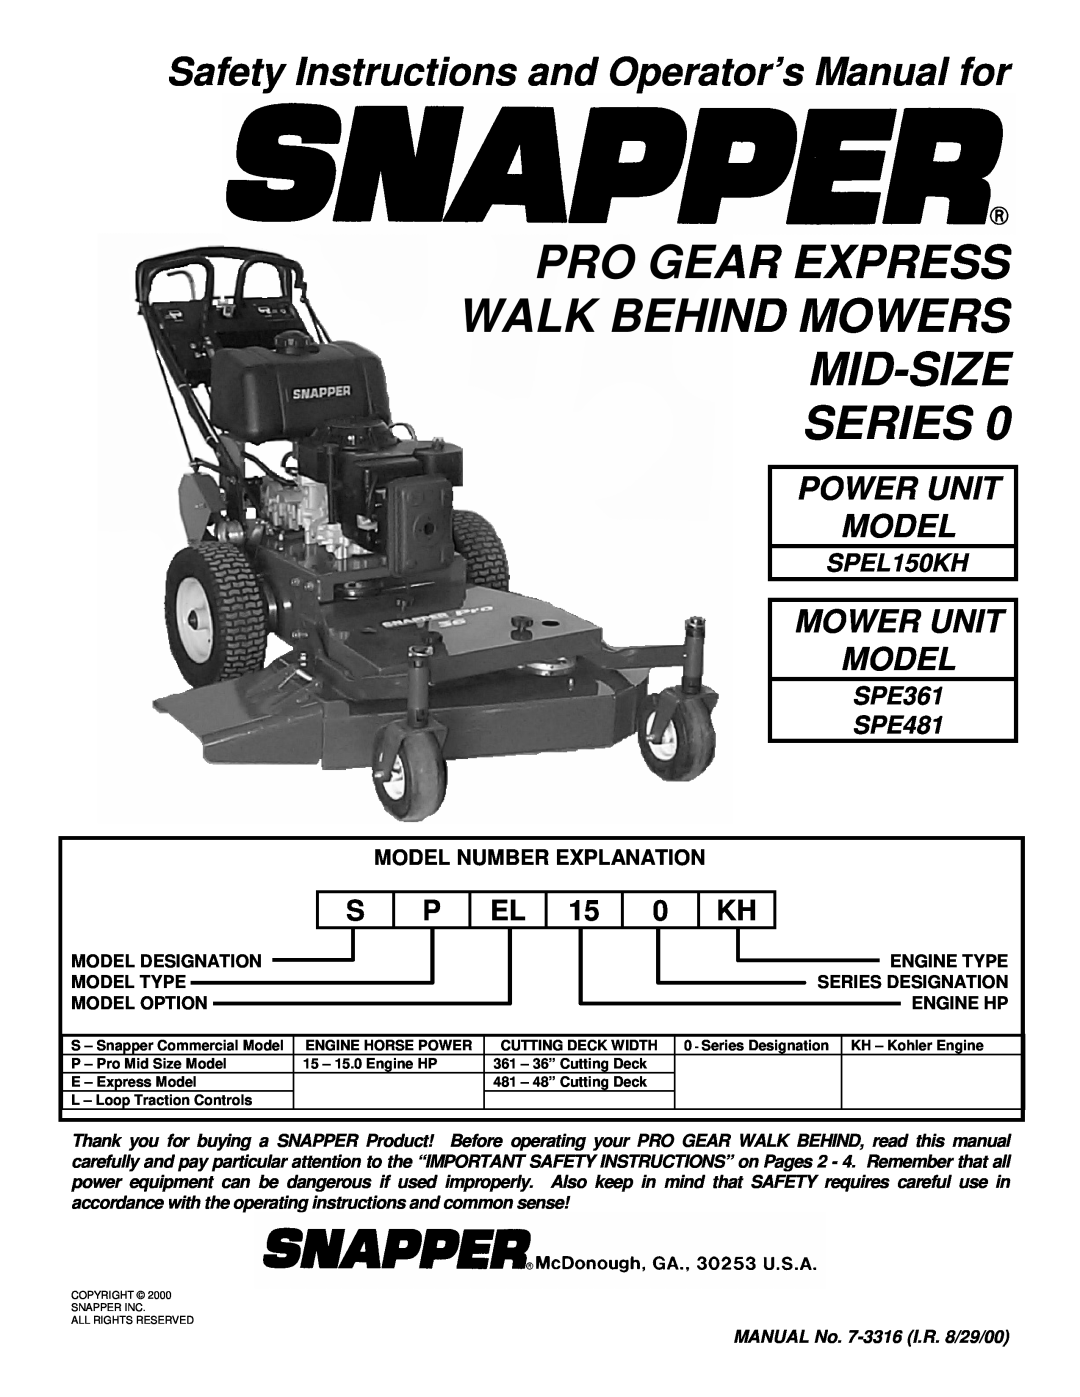 Snapper SPE481 important safety instructions Pro Gear Express Walk Behind Mowers Mid-Size Series, Model Number Explanation 